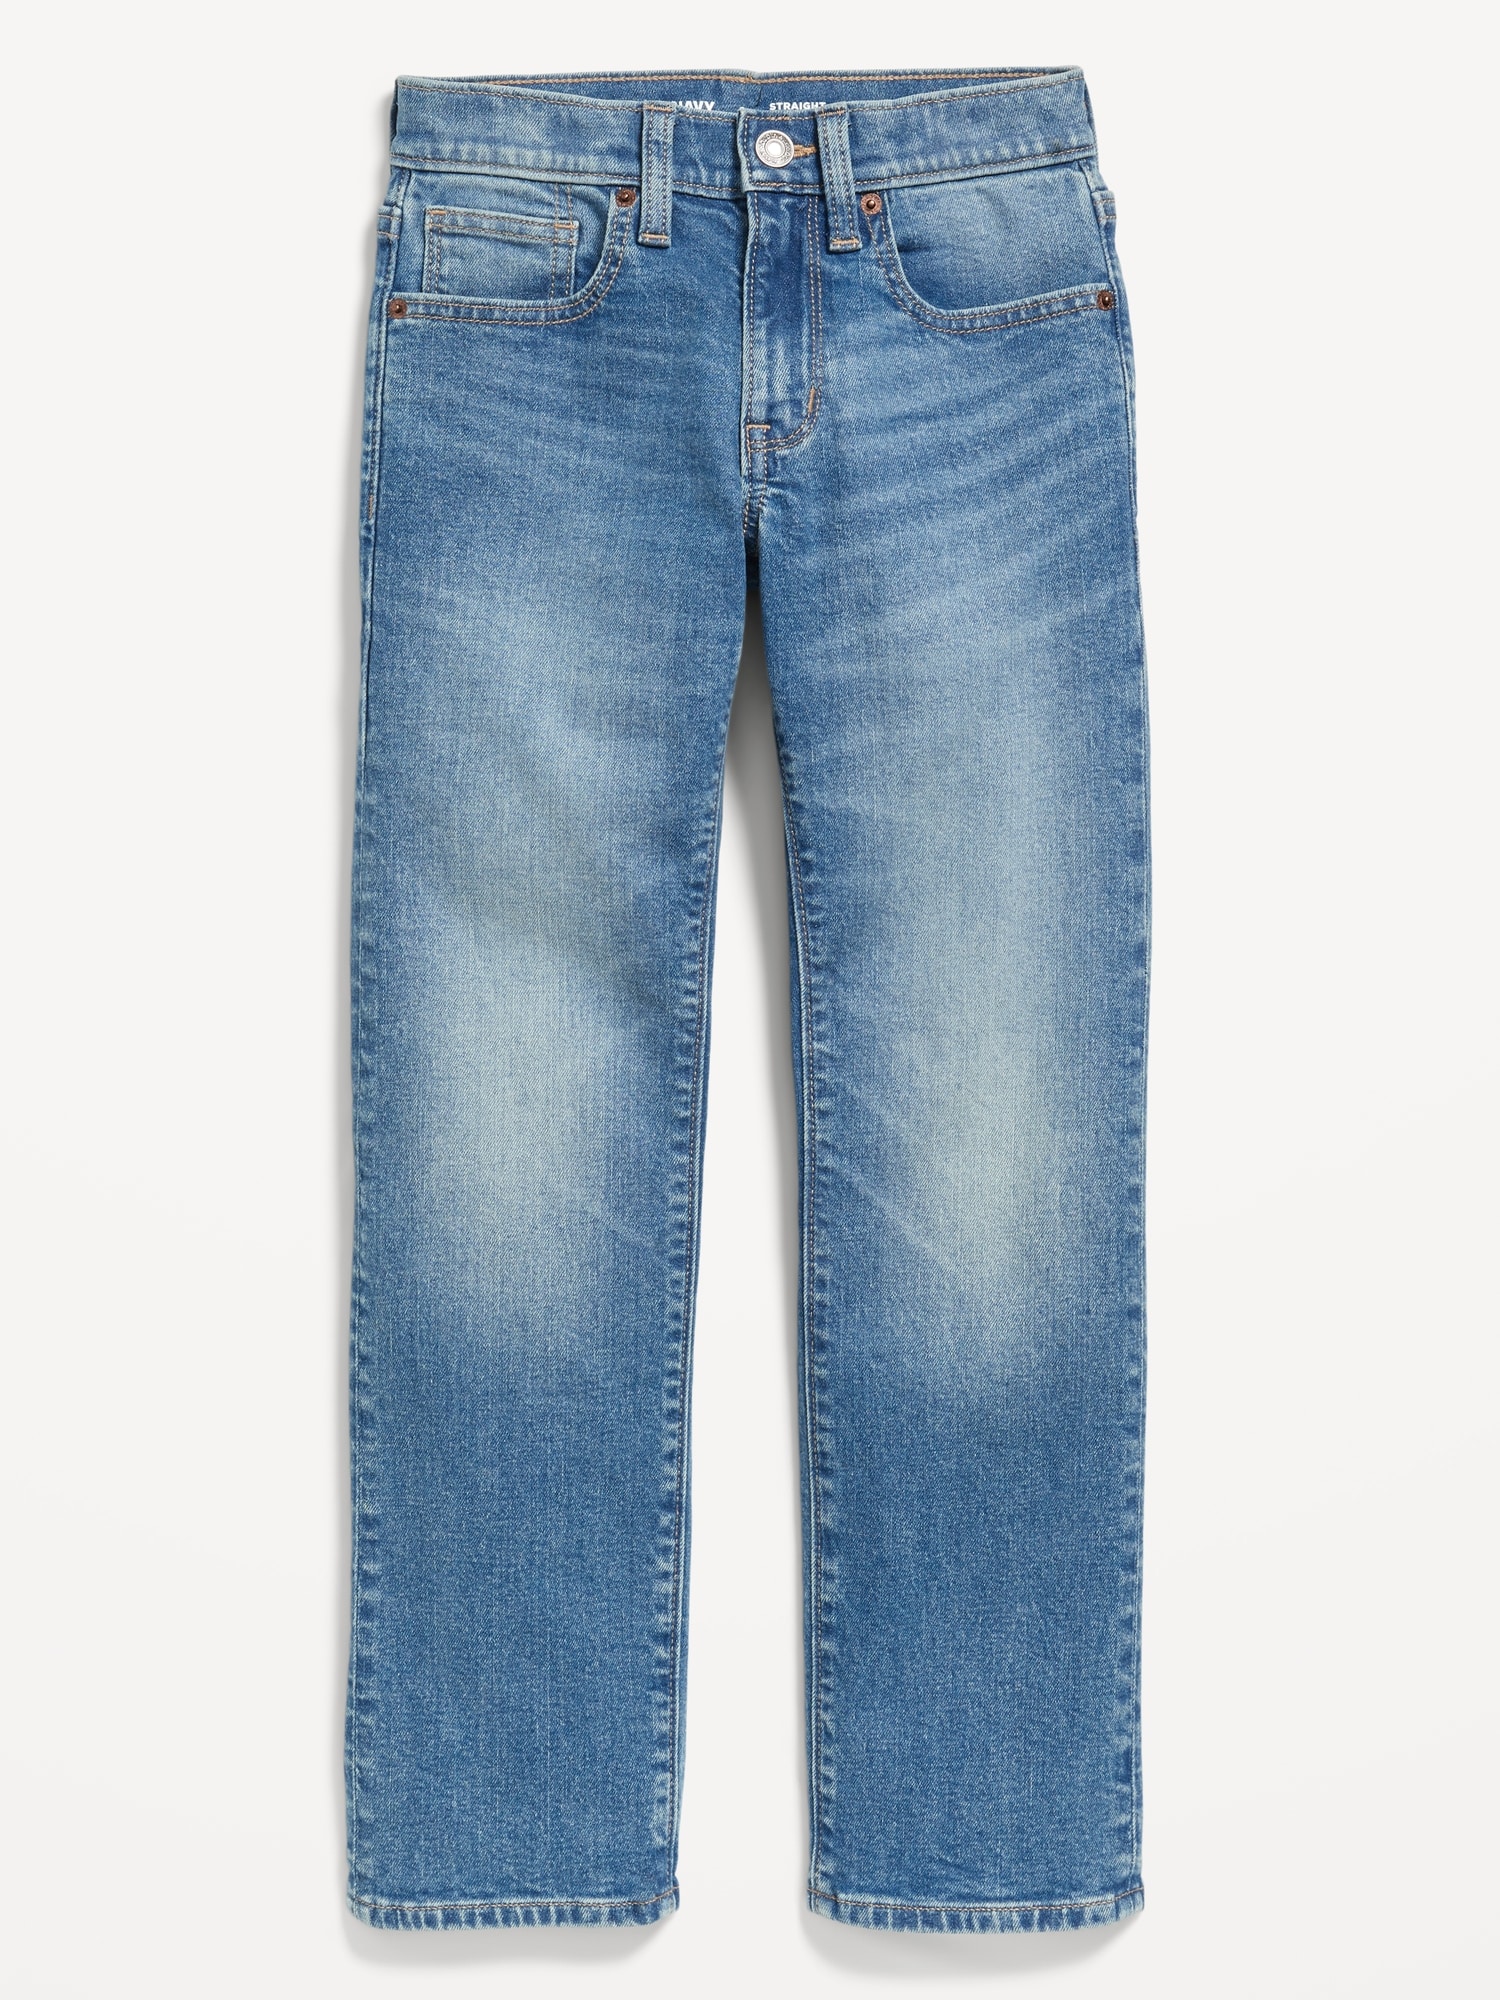 Straight Jeans 2-Pack for Boys